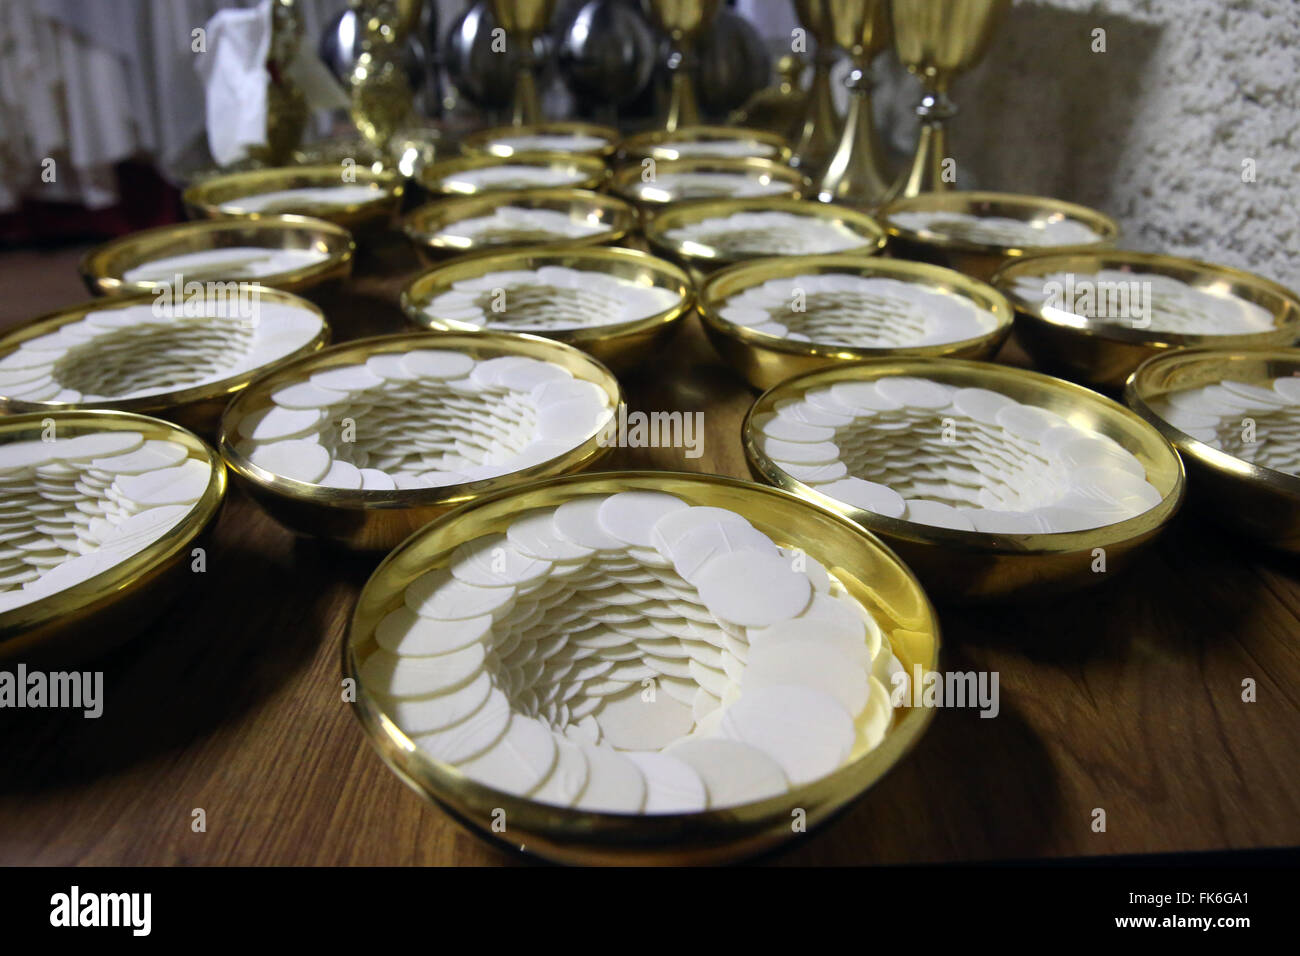 Roman Catholic unleavened wafers for the Holy Communion, Sanctuary-Shrine of Jean-Marie Vianney, Ars-sur-Fromans, Ain, France Stock Photo